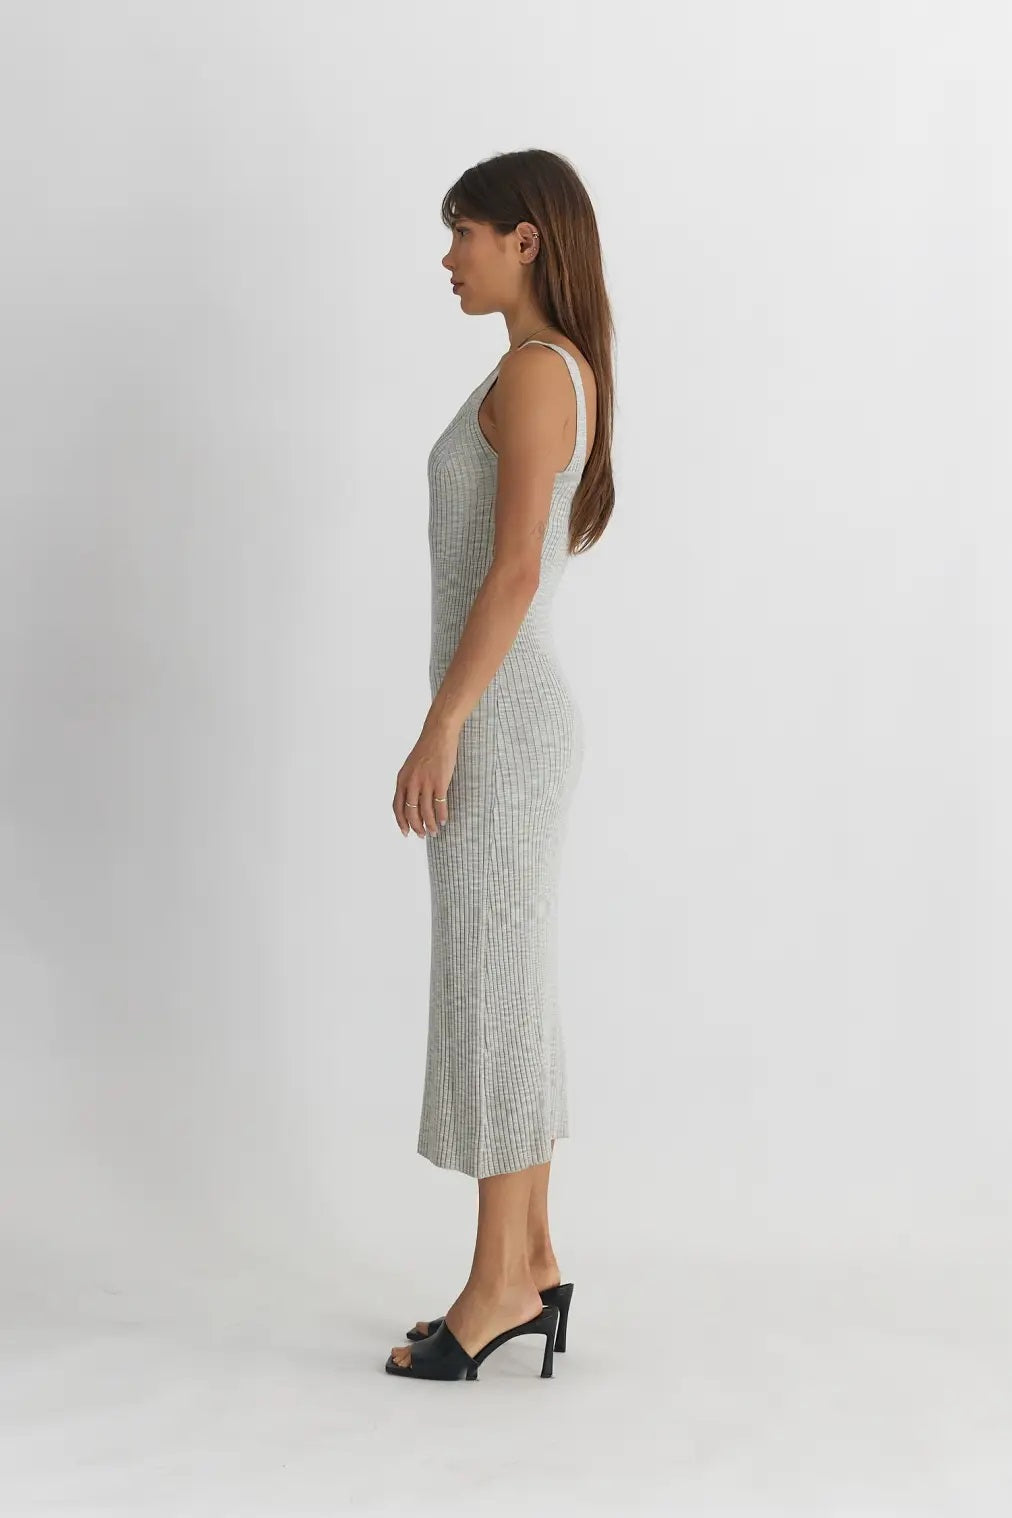 all:row, The Dove Dress in Heather Grey - Boutique Dandelion